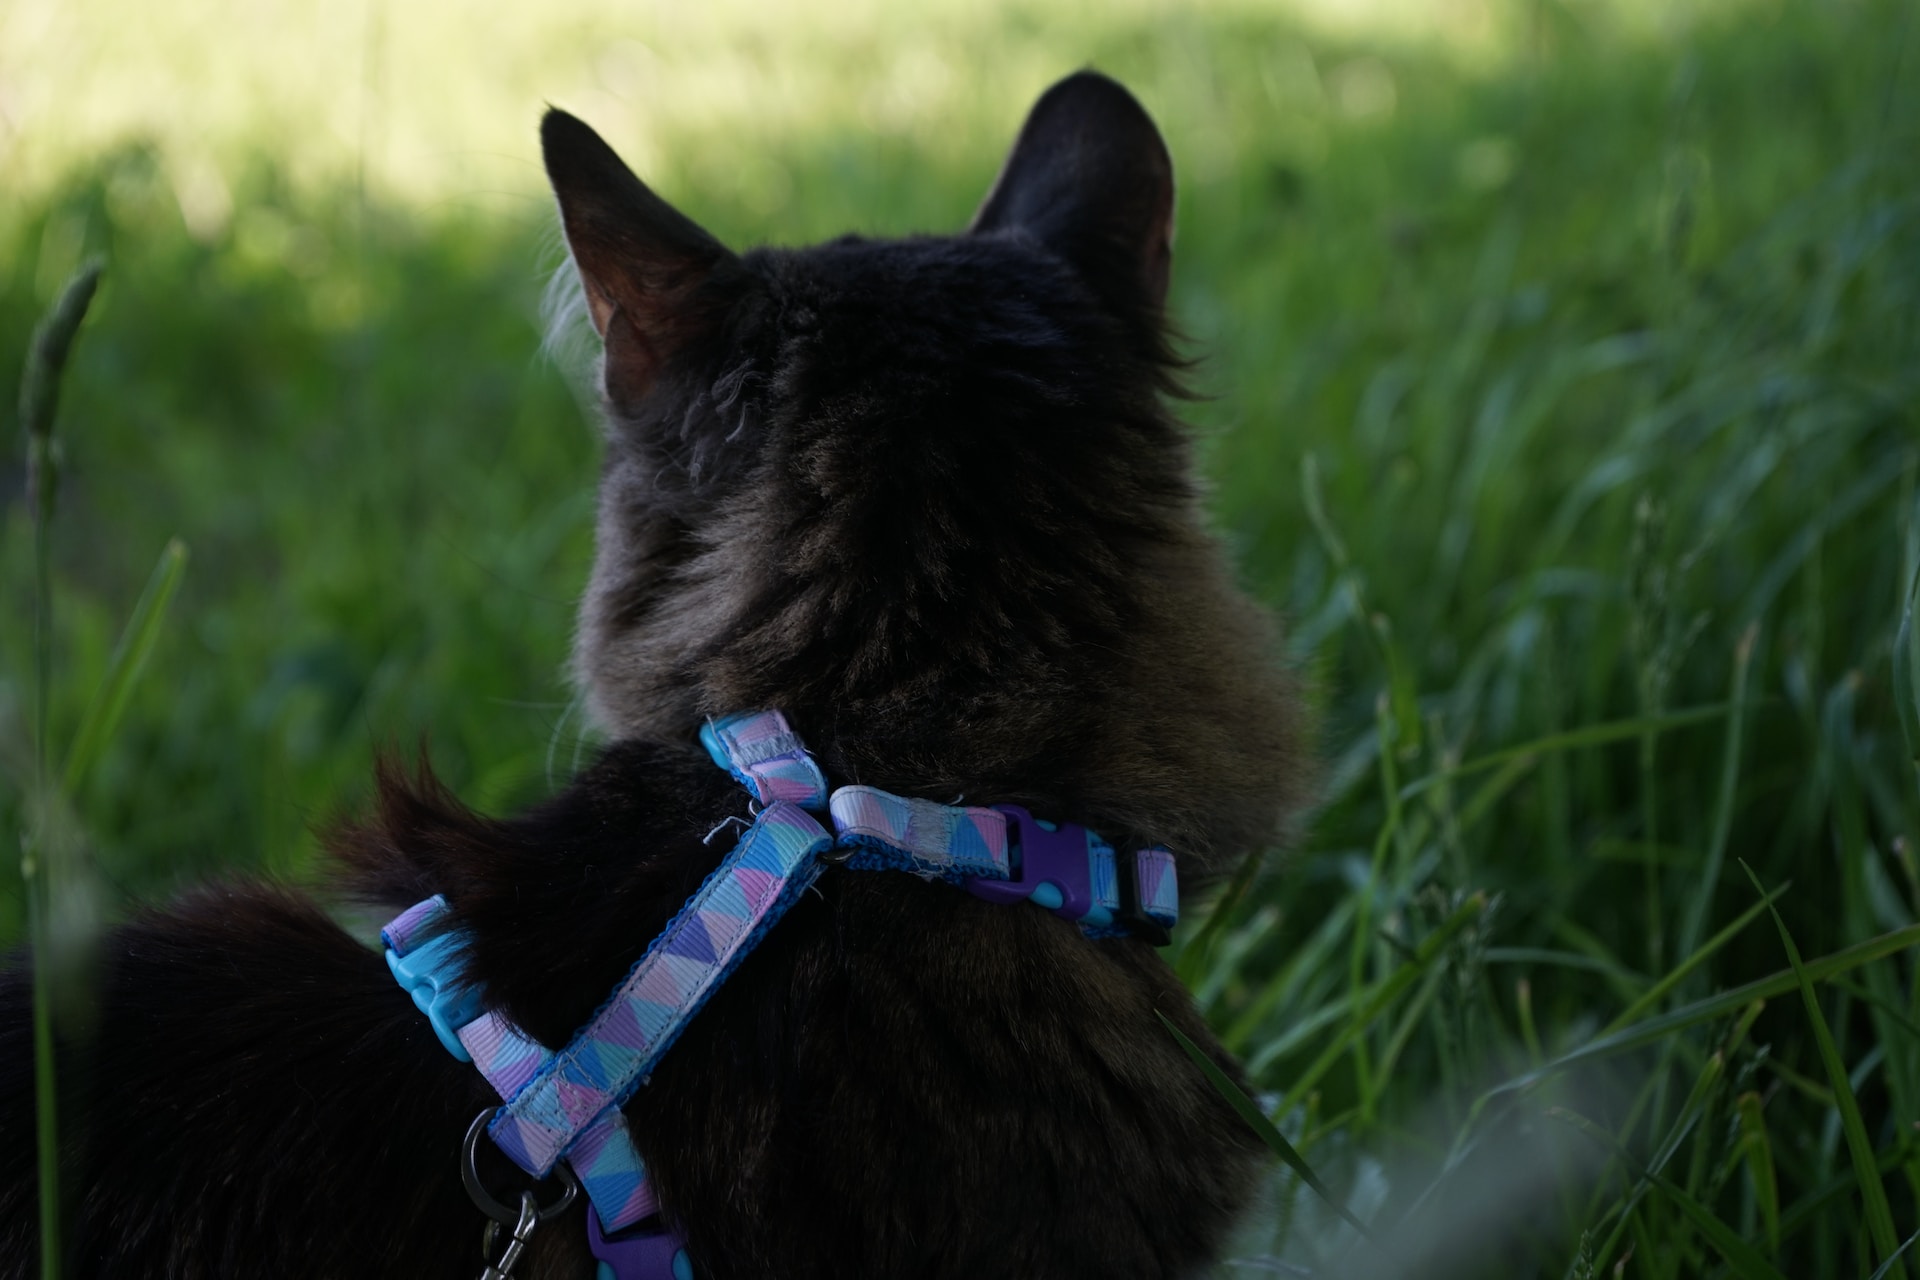 A cat wearing a harness looking out into a grassy lawn